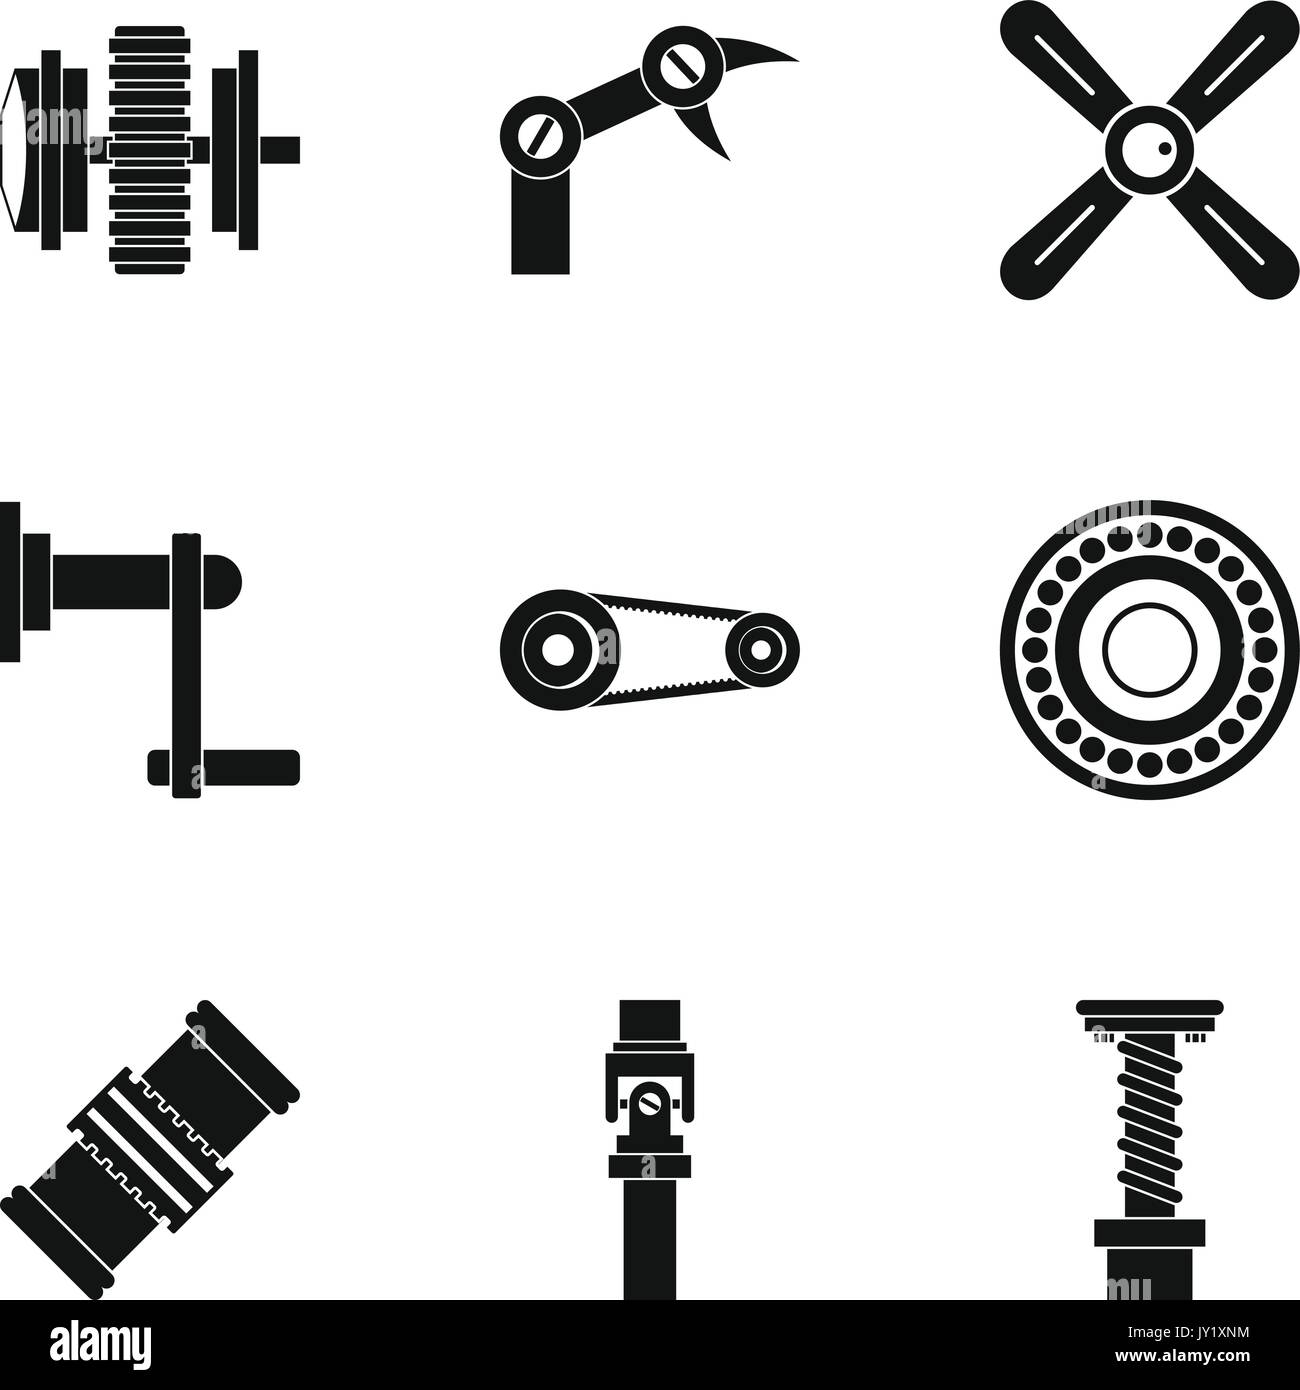 Machinery gear icon set, simple style Stock Vector